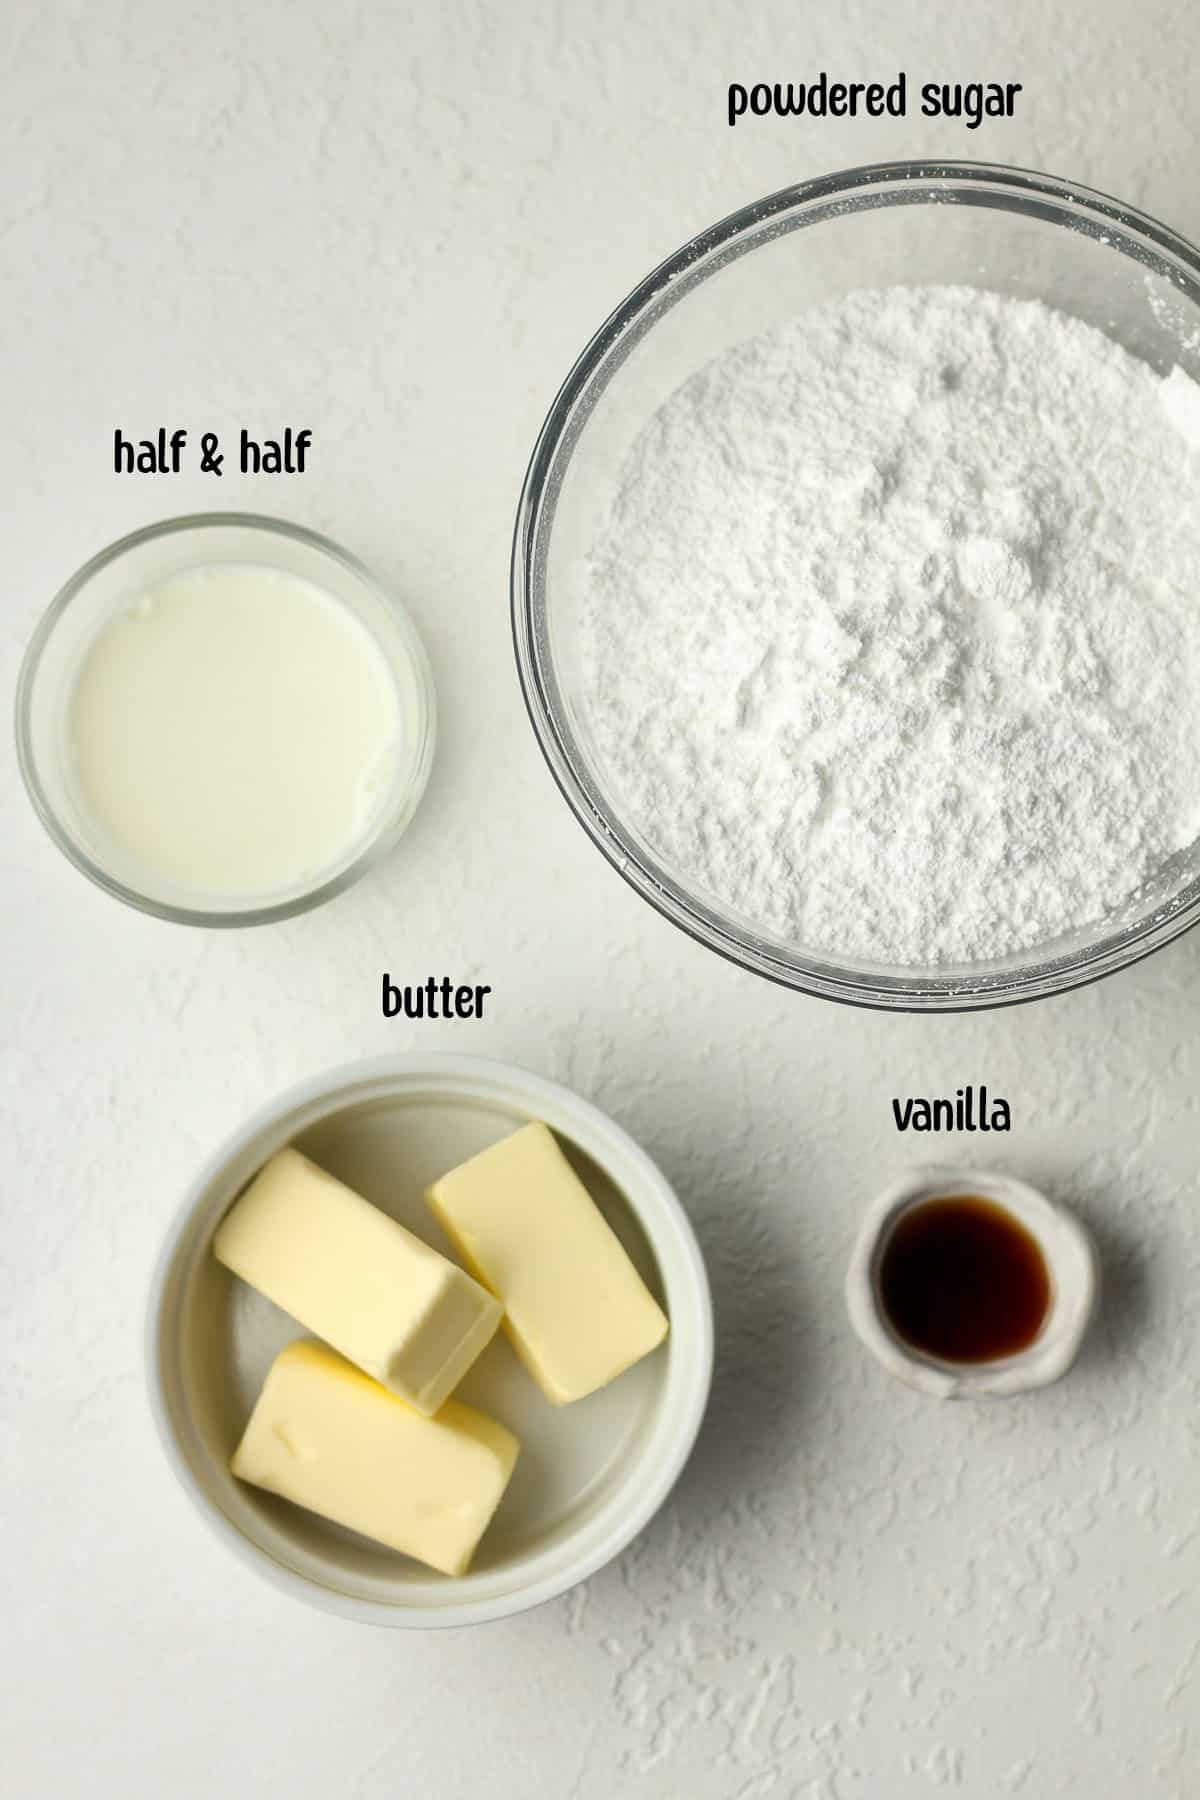 The labeled ingredients for the powdered sugar frosting.